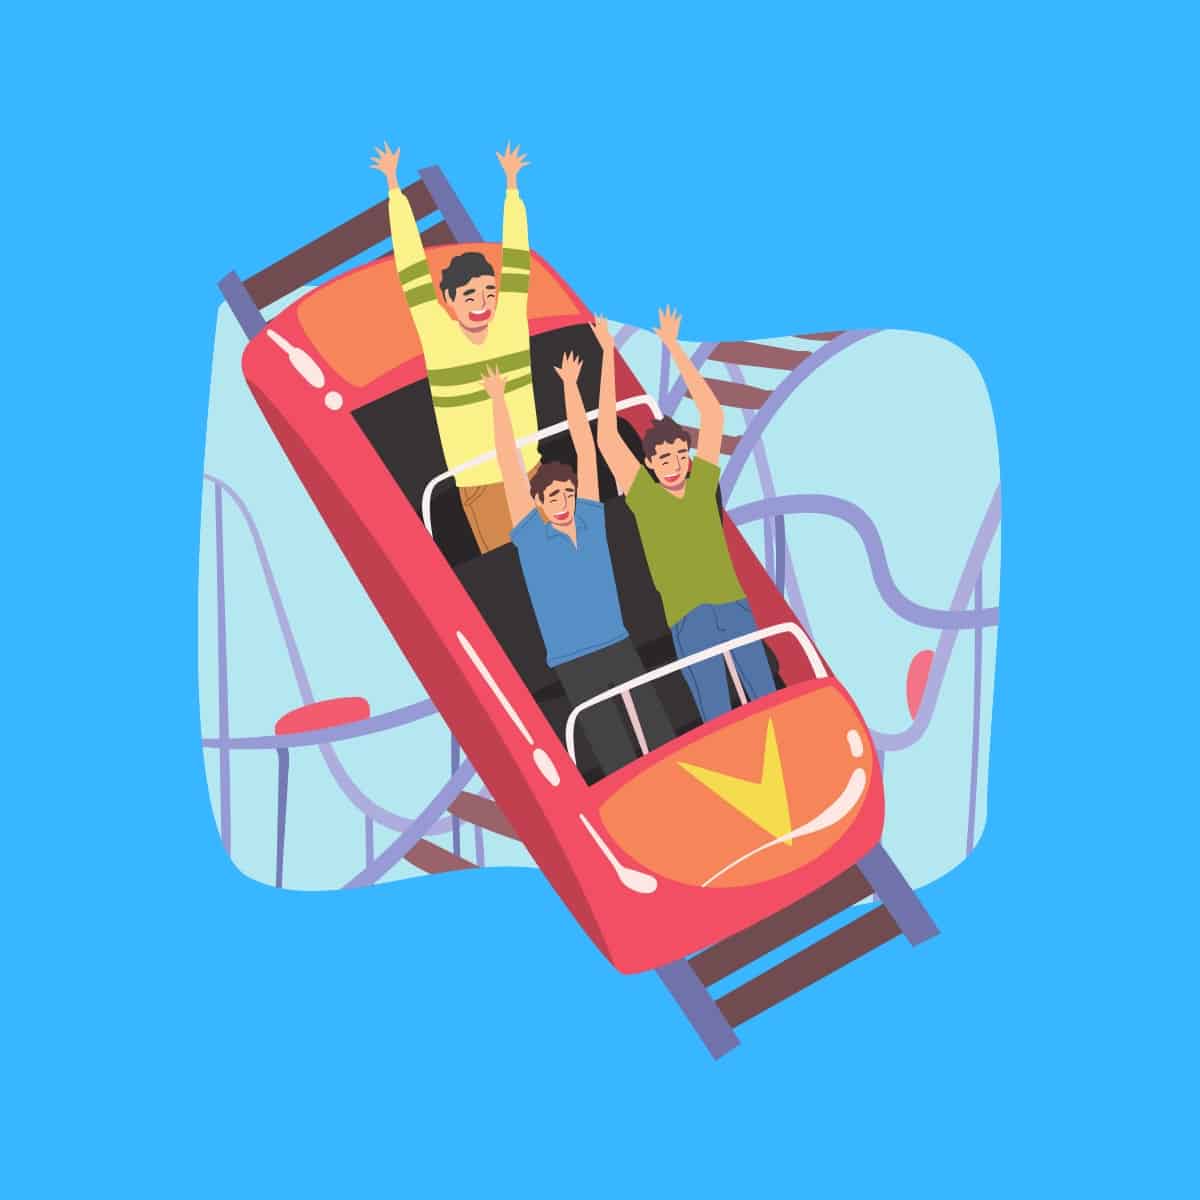 Cartoon graphic of 3 people in a roller coaster on a blue background.